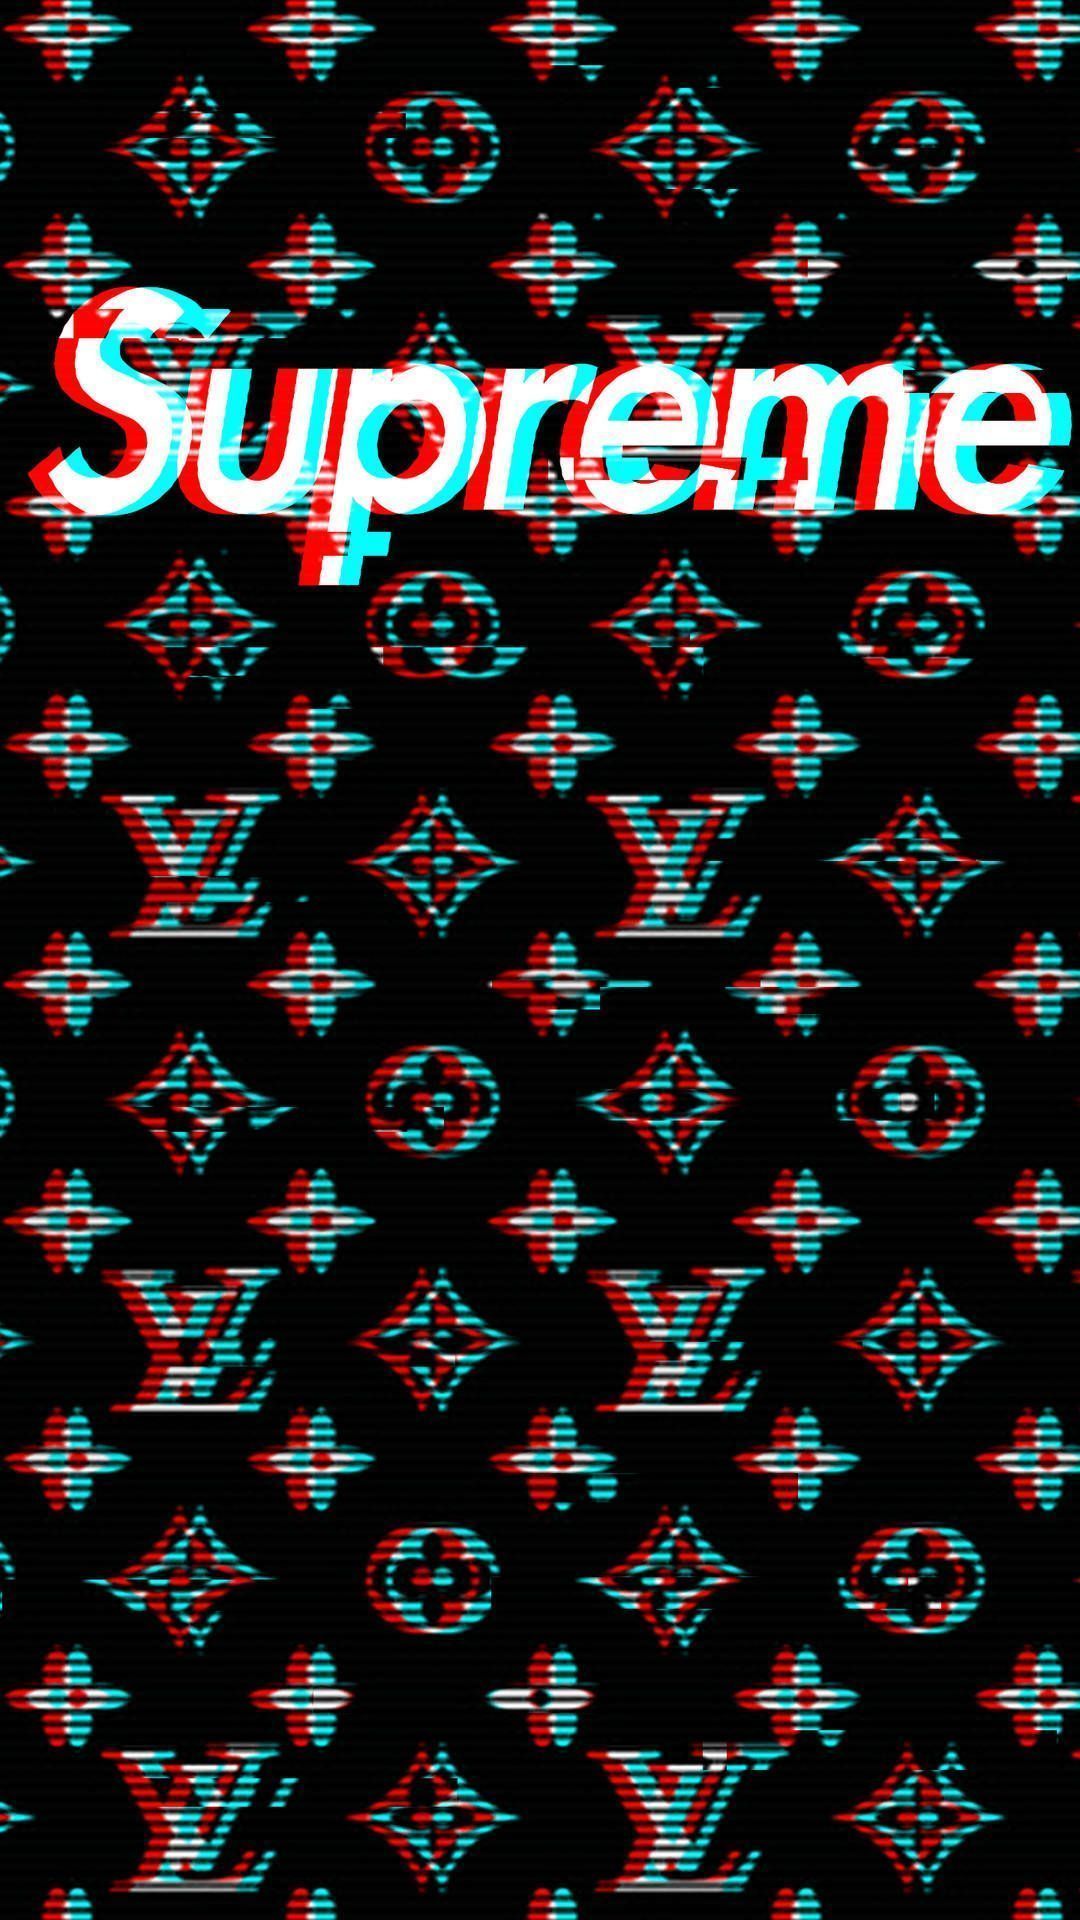 Supreme wallpaper I made for my phone - Supreme, Louis Vuitton